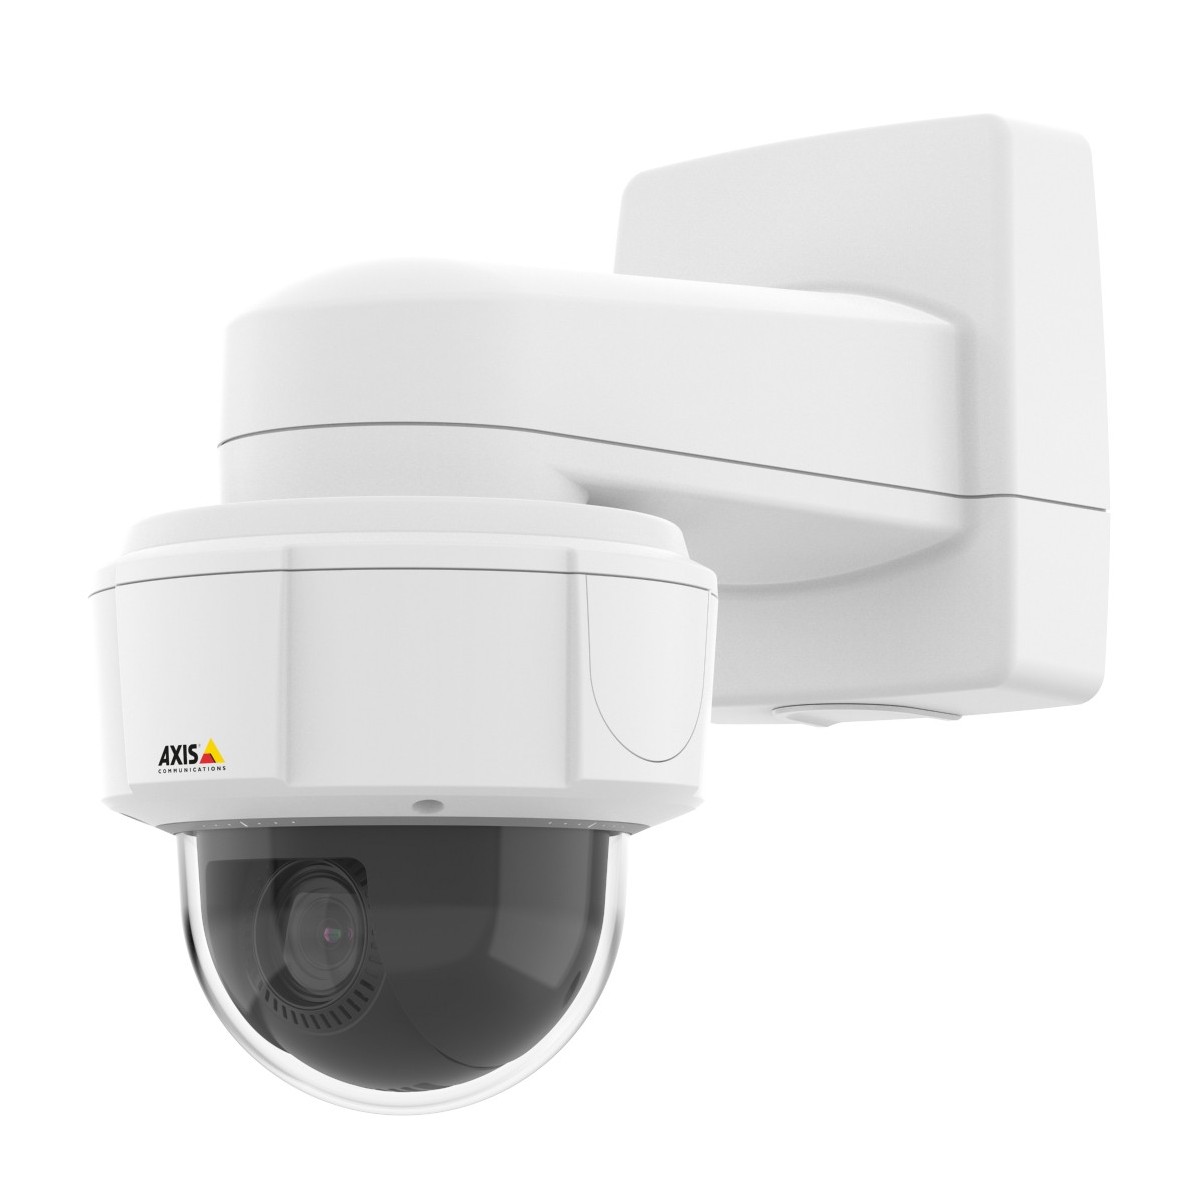 Axis M5525-E - IP security camera - Indoor & outdoor - Wired & Wireless - Simplified Chinese - Traditional Chinese - German - En